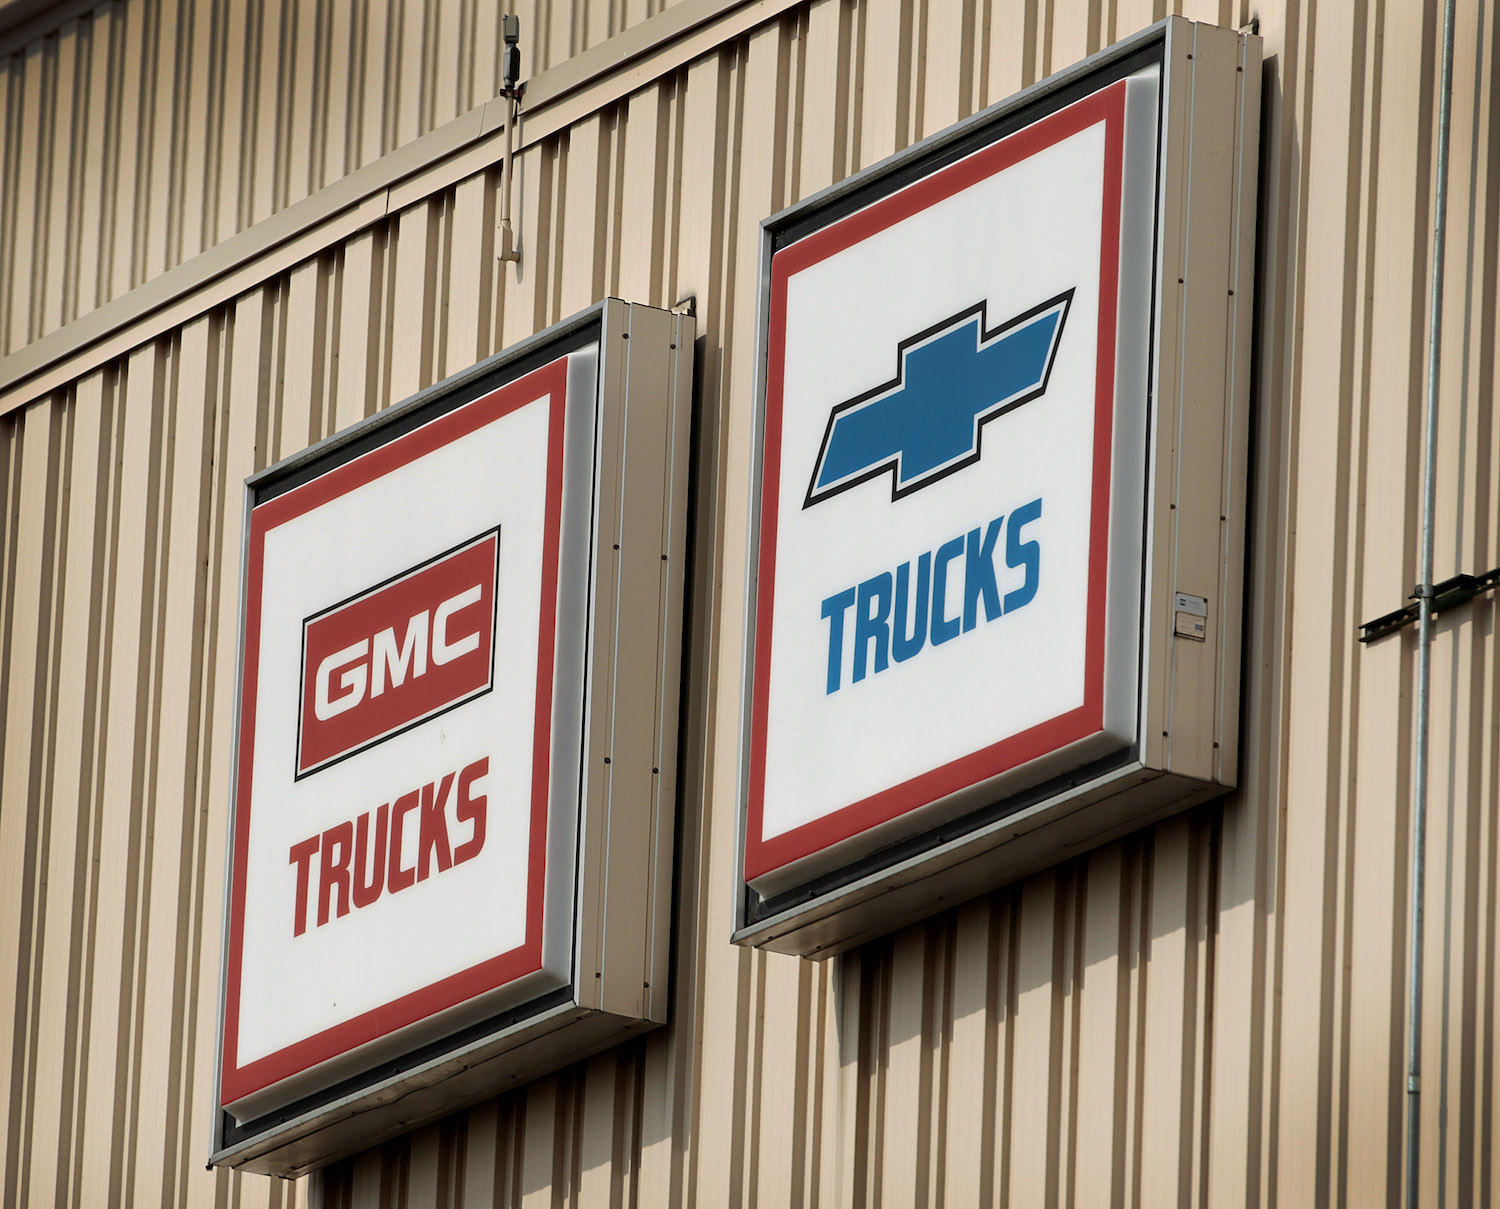 Vintage signs for GMC trucks and Chevy pickup trucks hanging on a tan, metal wall.